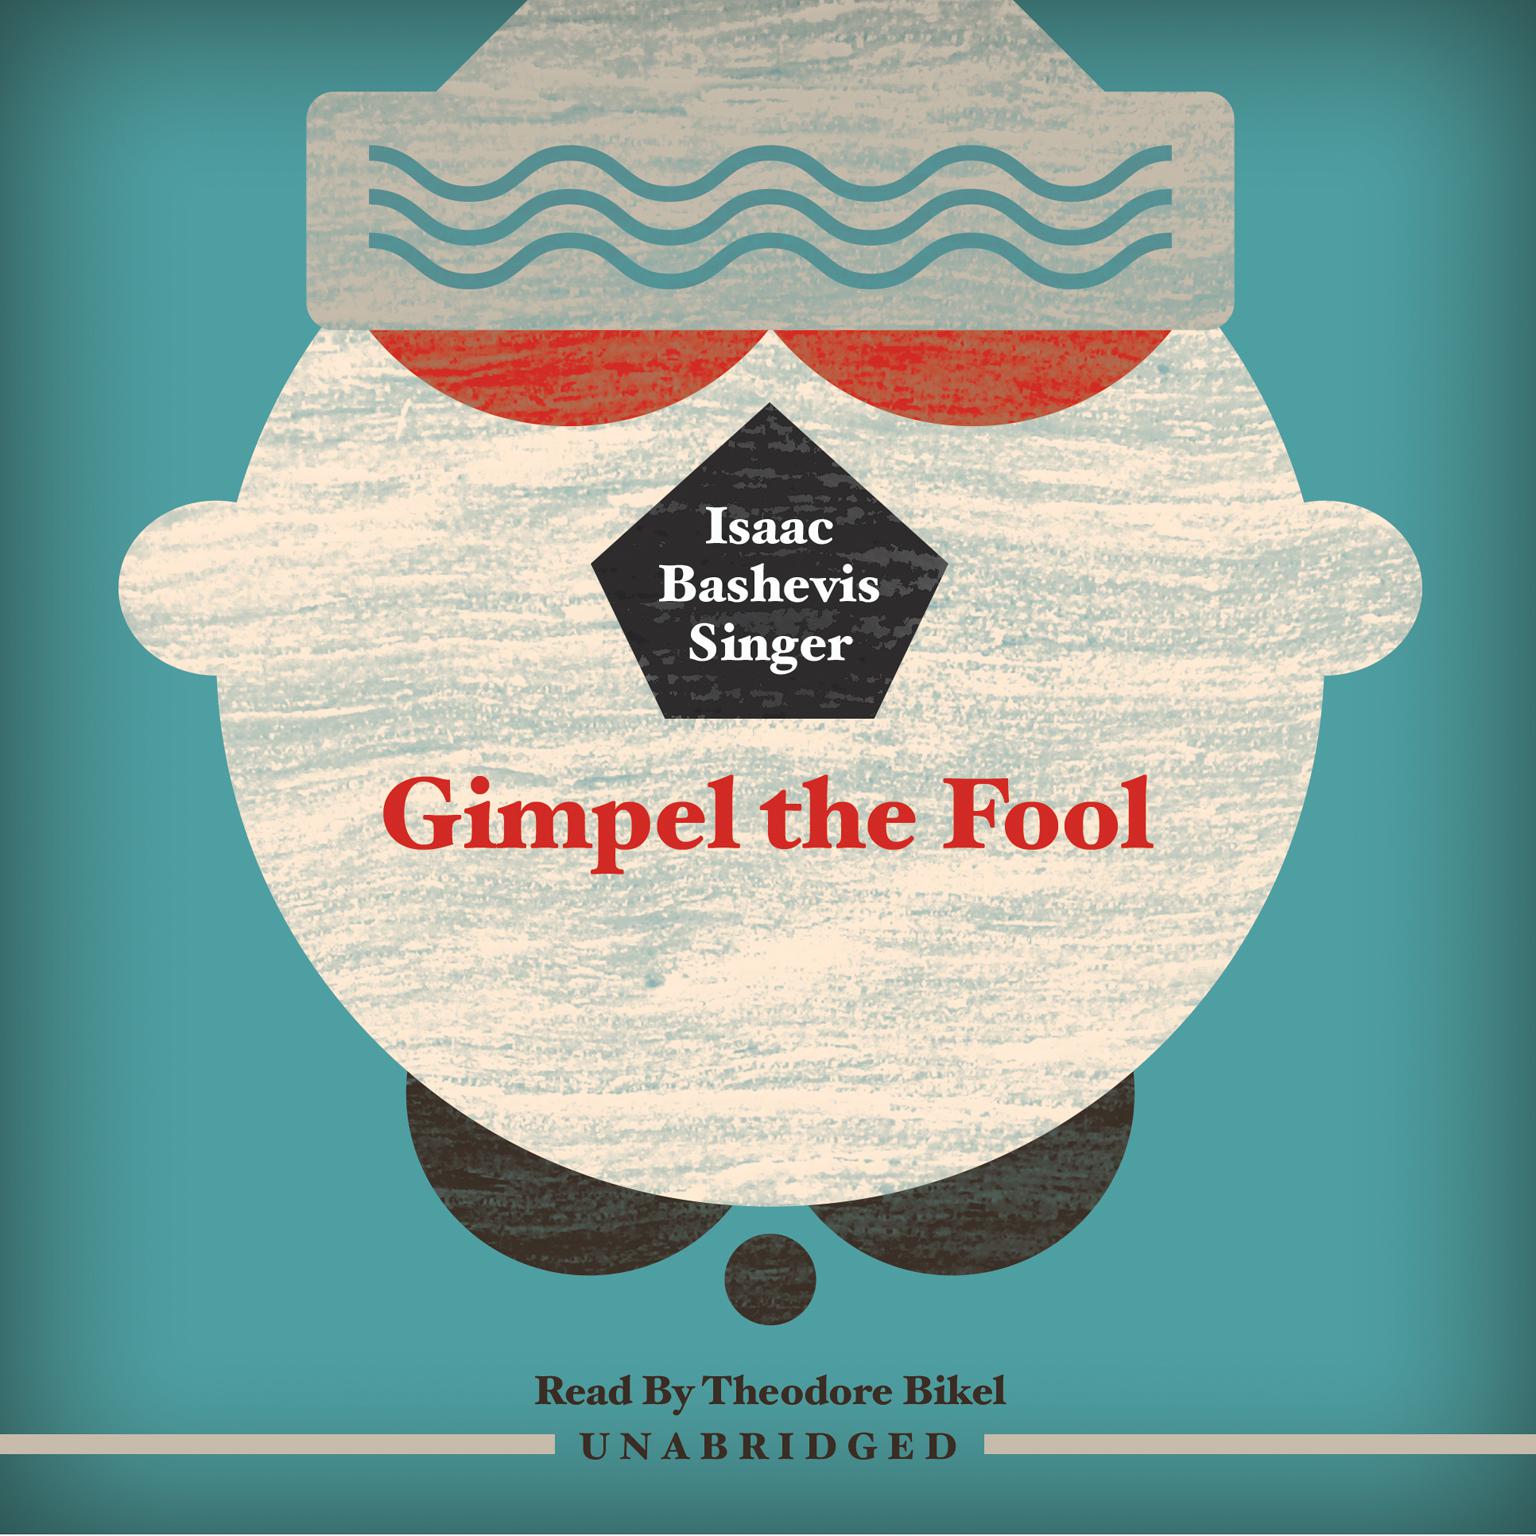 Gimpel the Fool Audiobook, by Isaac Bashevis Singer